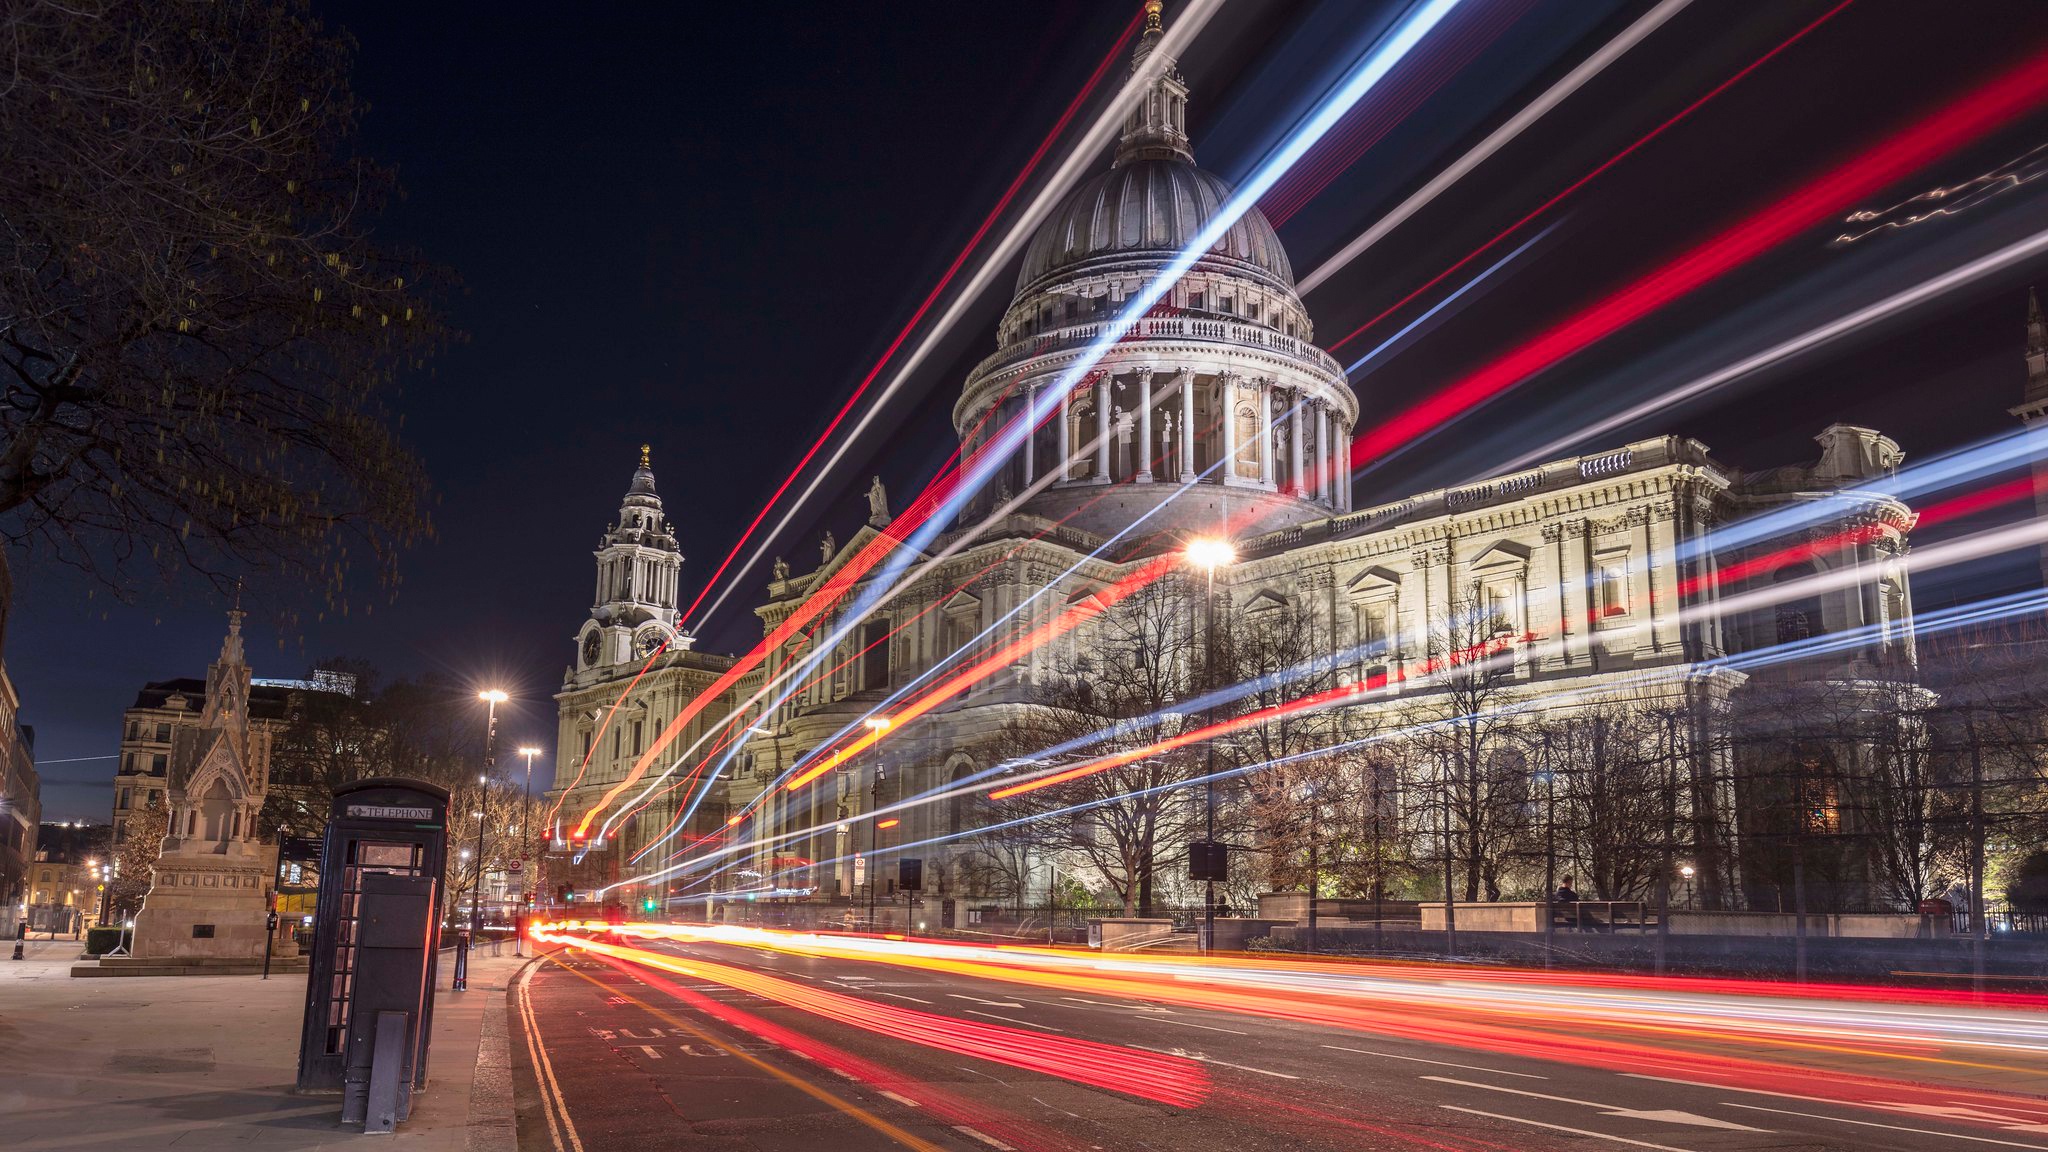 religious, st paul's cathedral, architecture, building, cathedral, england, light, london, night, street, time lapse, cathedrals